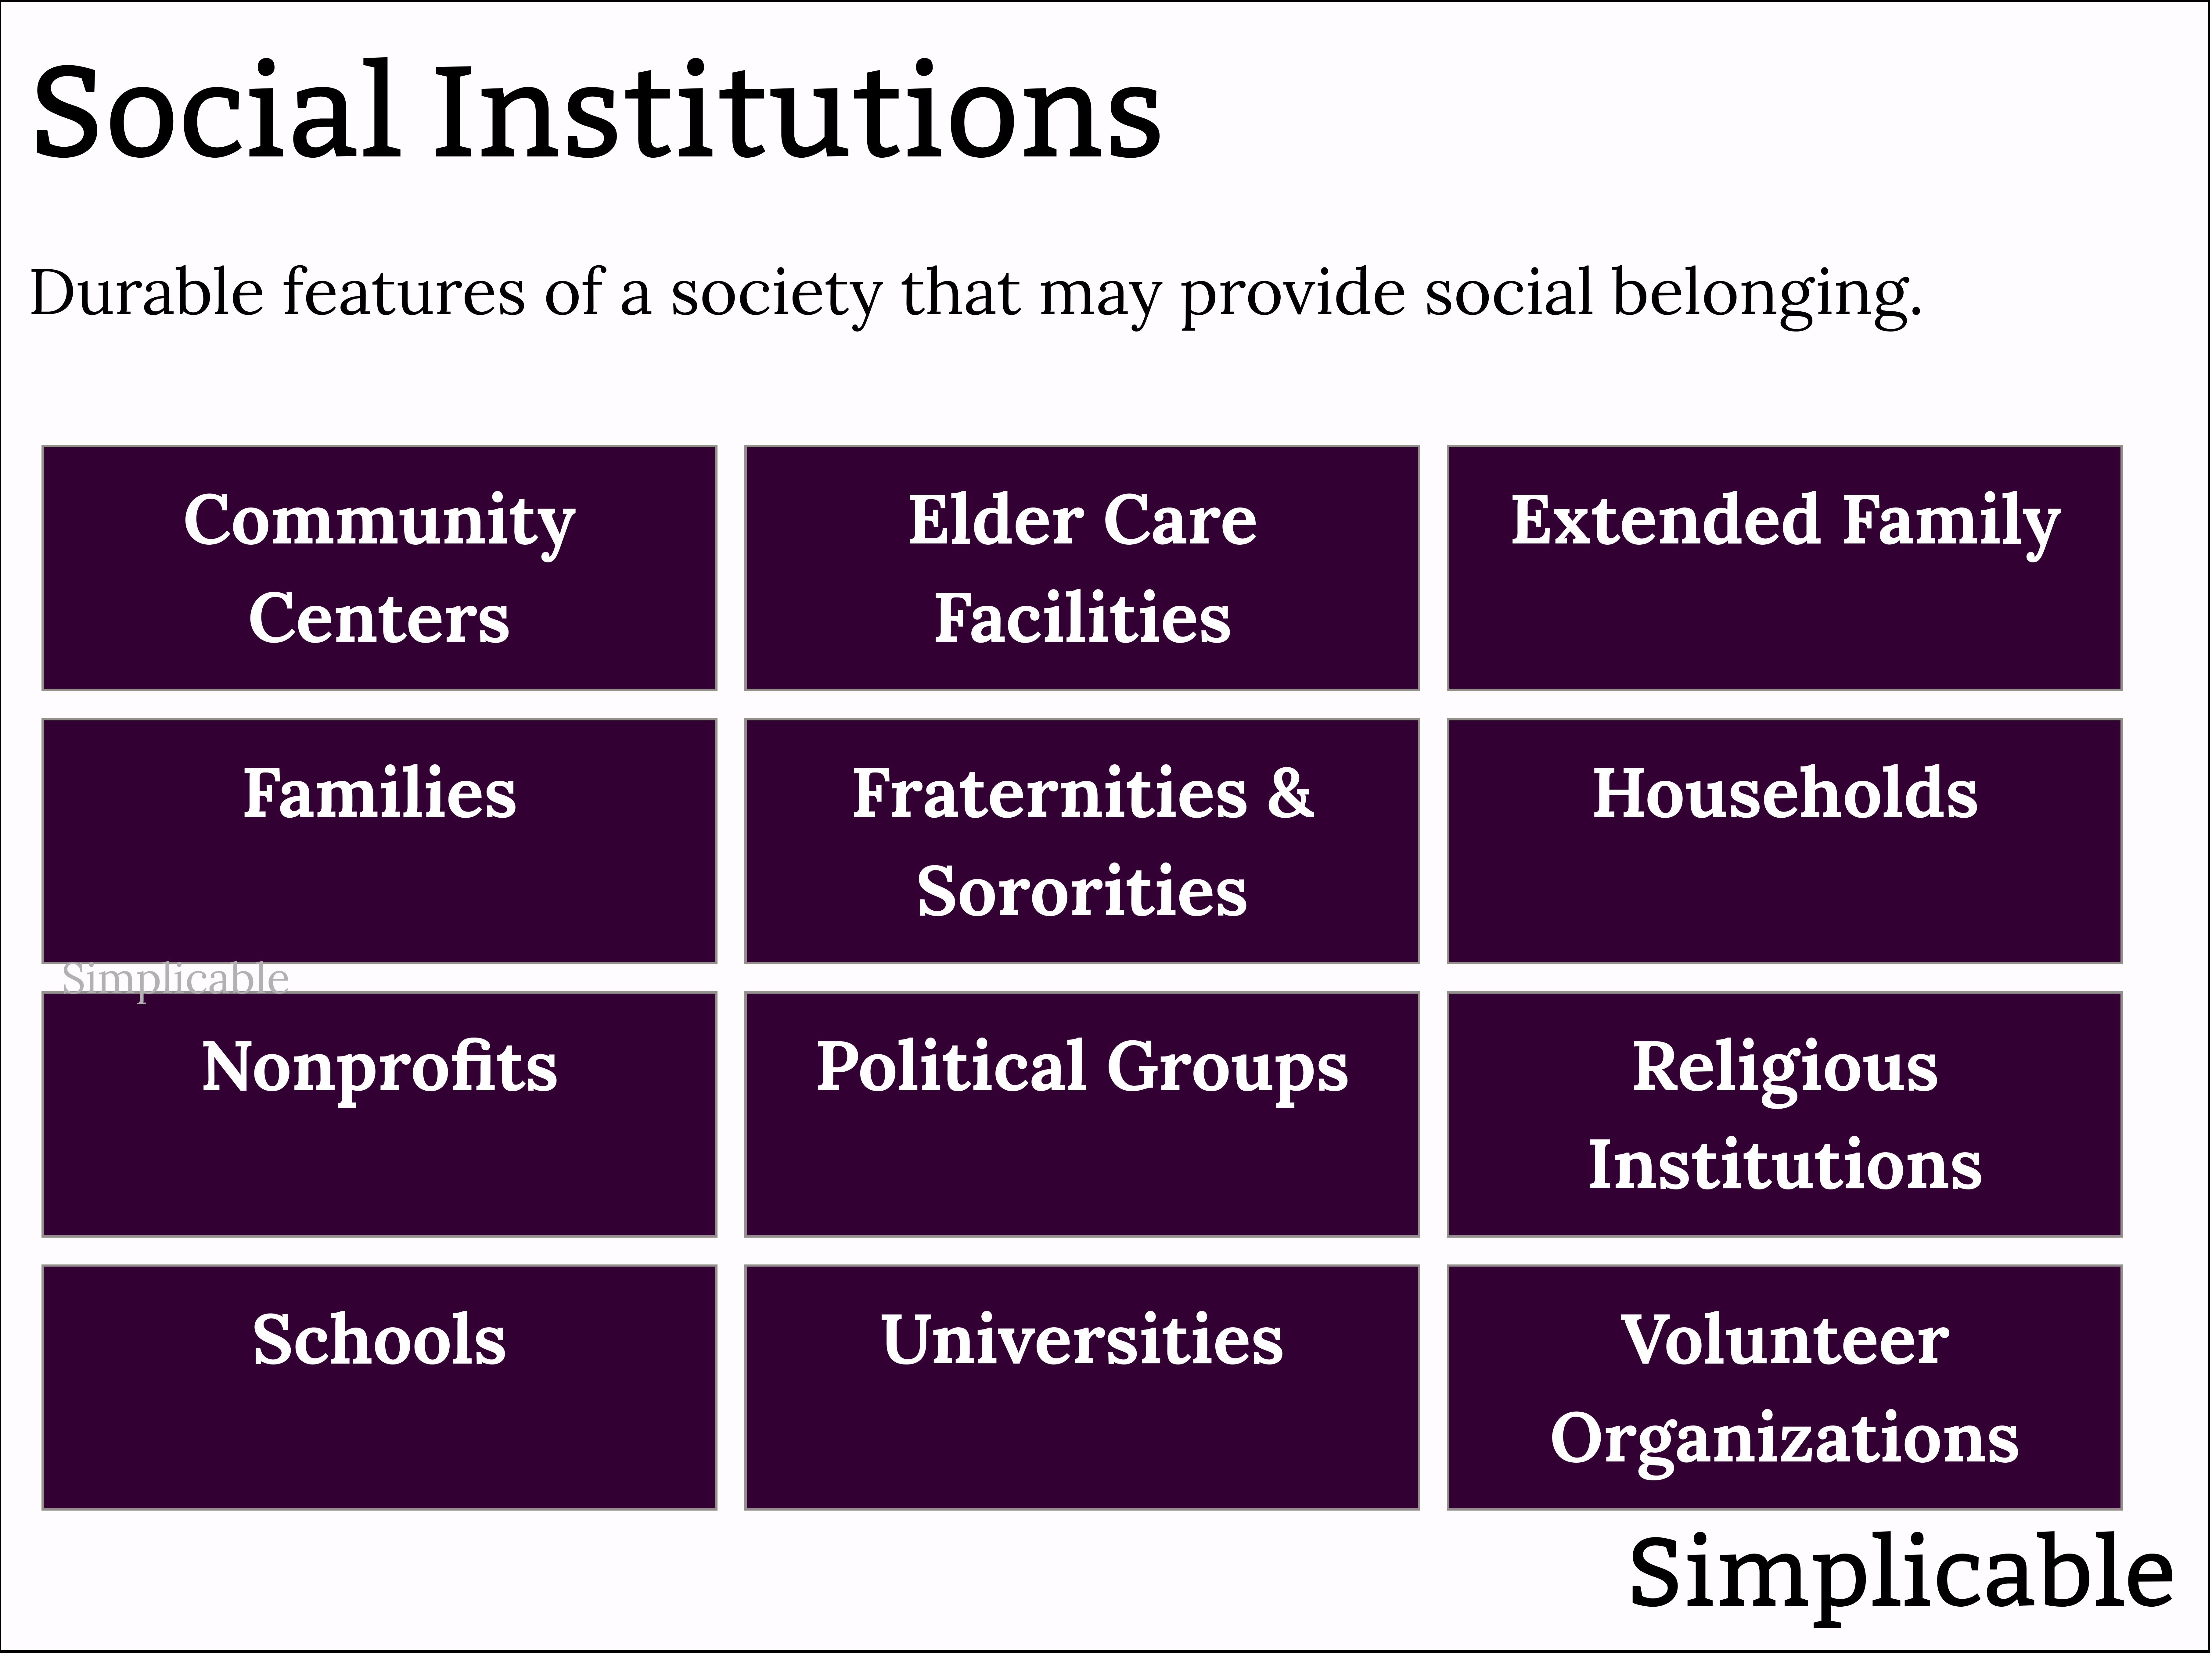 social institutions and social belonging